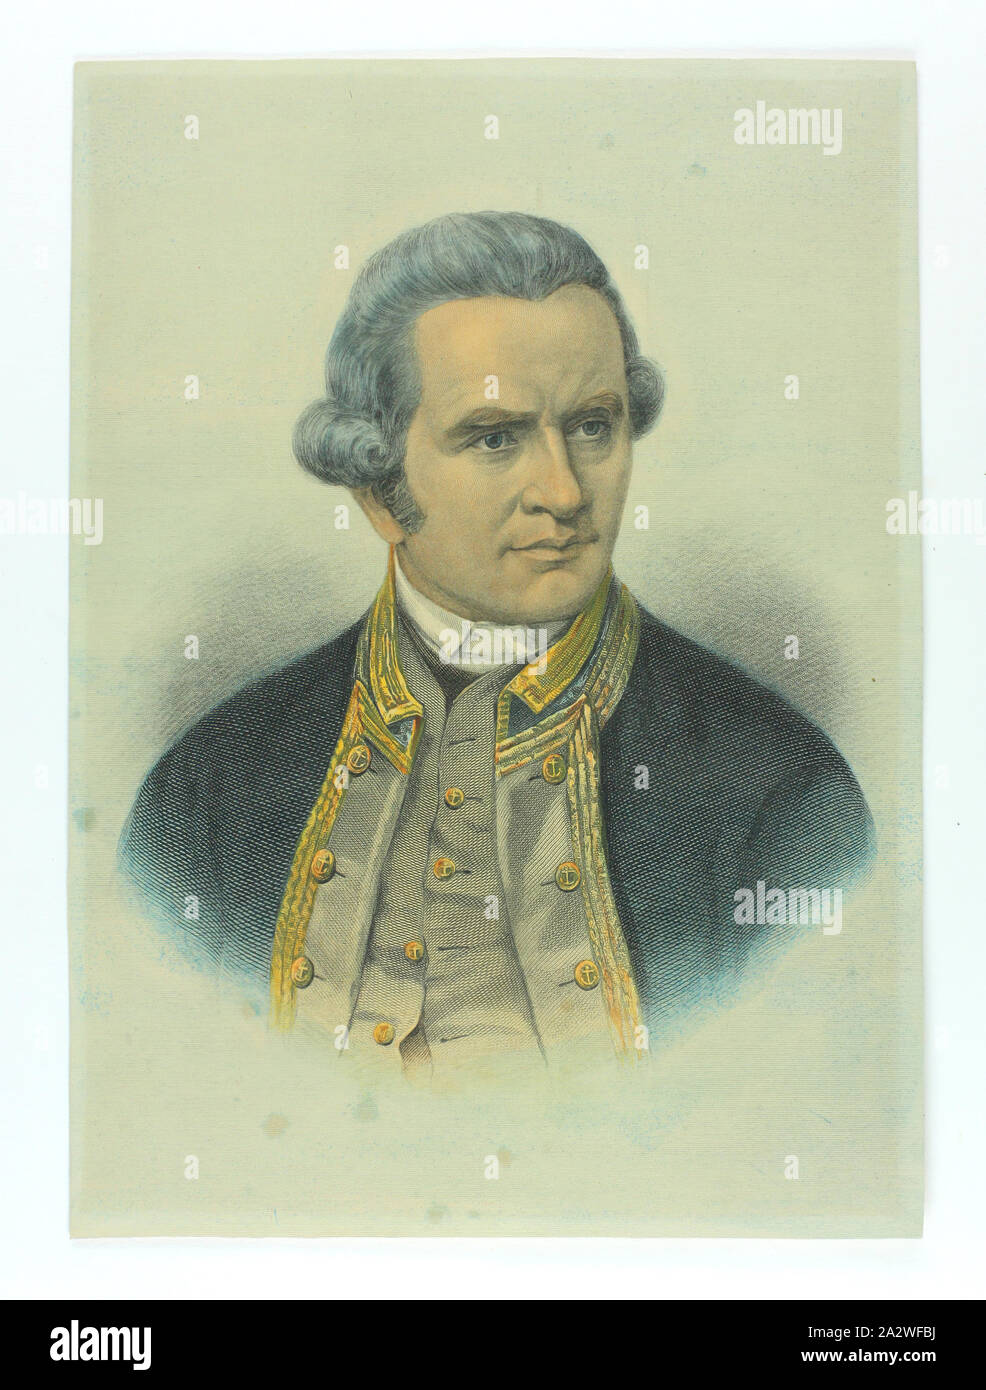 Engraving - Portrait of Captain James Cook, Hand-coloured, 19th century, Engraved portrait of Captain James Cook, hand-coloured. Identified by appearance rather than inscription, which is absent. It is likely to date to the 19th century. The artist is not identified on the portrait. It is similar to an engraving identified as by H.B. Halls (Henry Bryan Halls) & Sons after artist William McLeod (1850-1929). Note also the engraving of Cook by Edward Scriven (1775-1841 Stock Photo